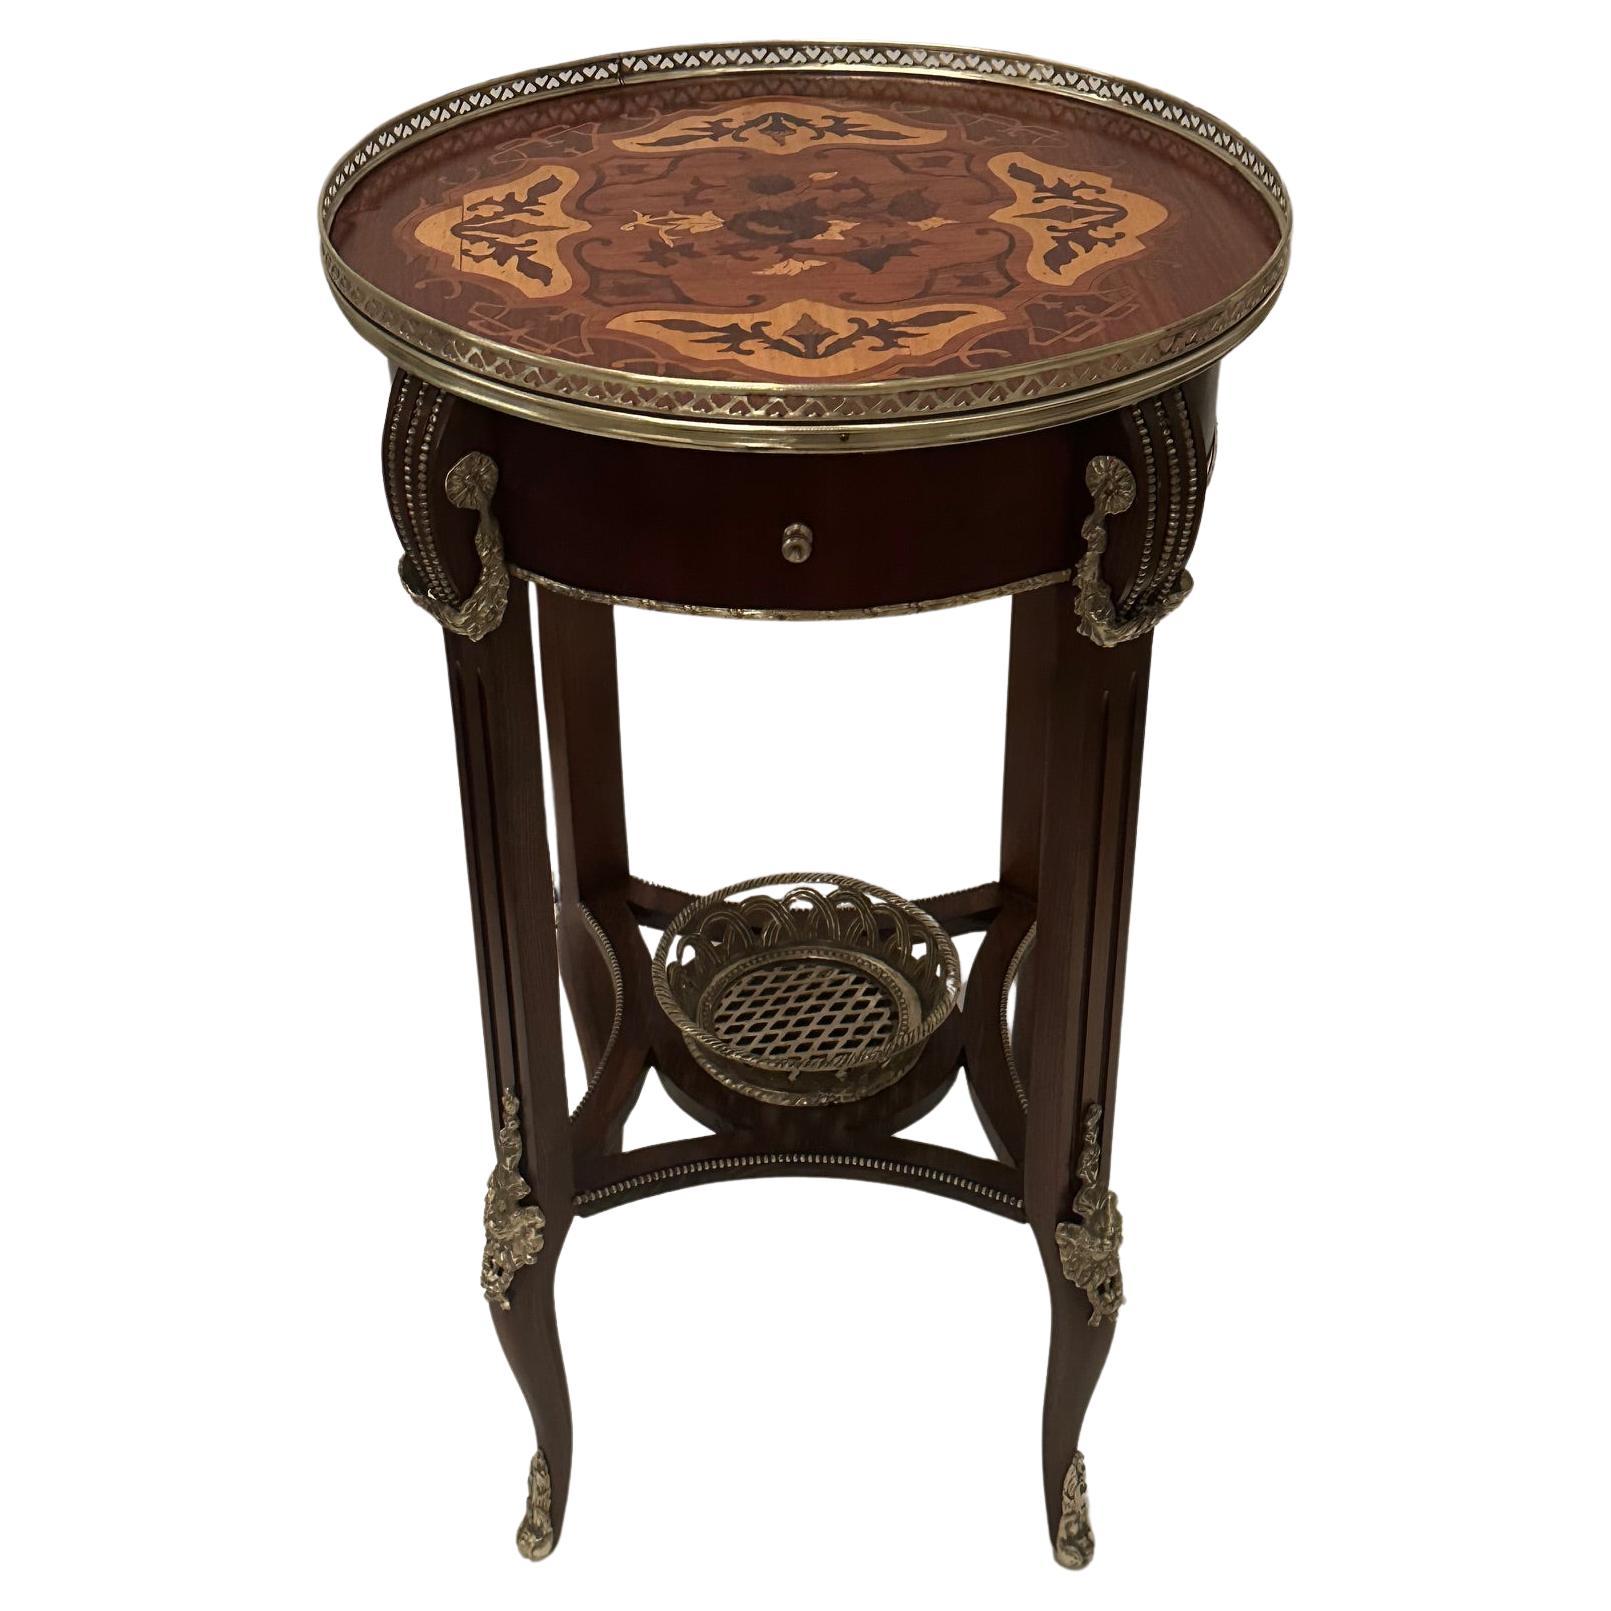 Sumptuous Round Mahogany Inlaid Side Table with Bronze Mounts For Sale